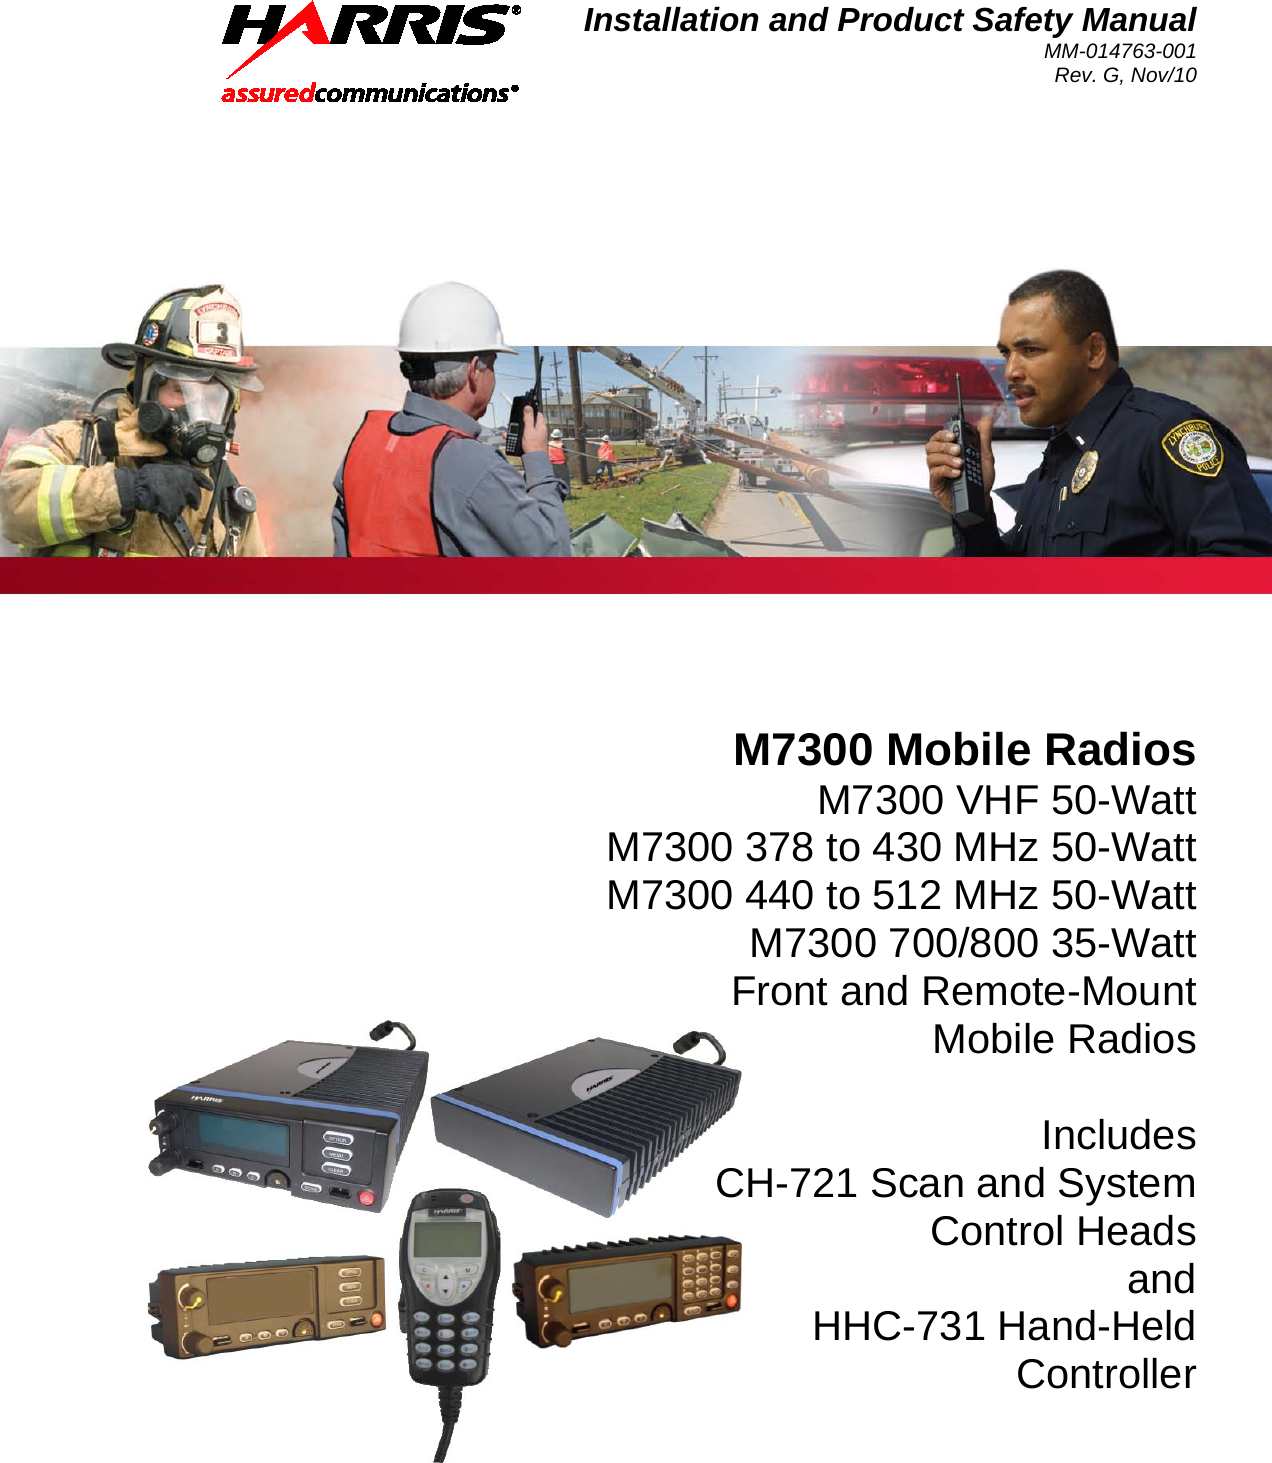 Installation and Product Safety Manual MM-014763-001 Rev. G, Nov/10   M7300 Mobile Radios M7300 VHF 50-Watt M7300 378 to 430 MHz 50-Watt  M7300 440 to 512 MHz 50-Watt M7300 700/800 35-Watt Front and Remote-Mount Mobile Radios  Includes CH-721 Scan and System Control Heads and HHC-731 Hand-Held Controller  